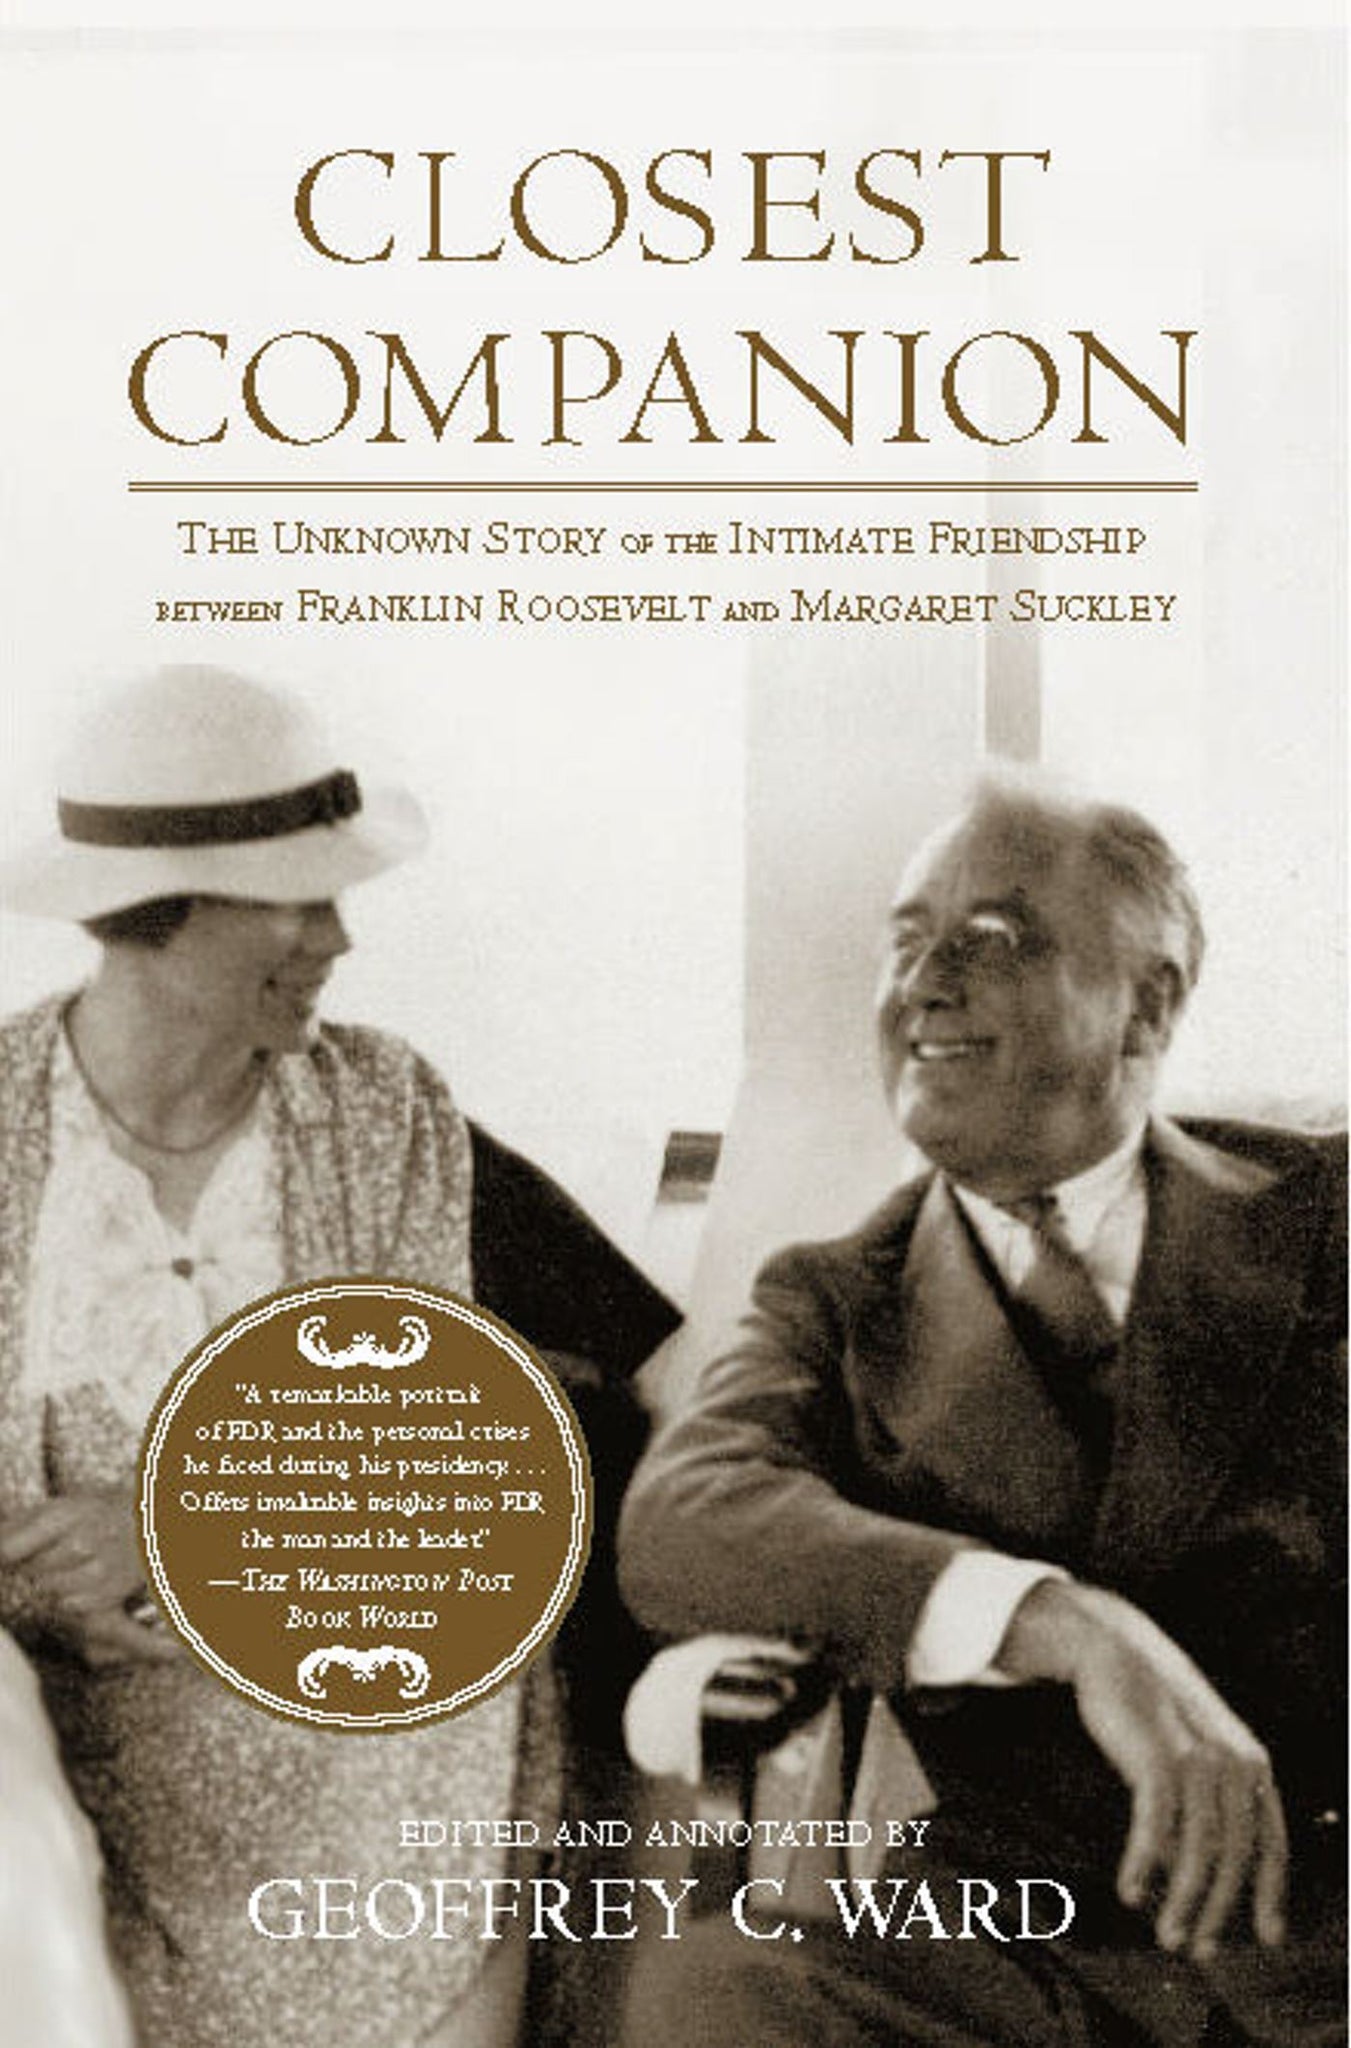 Closest Companion : The Unknown Story of the Intimate Friendship Between Franklin Roosevelt and Margaret Suckley